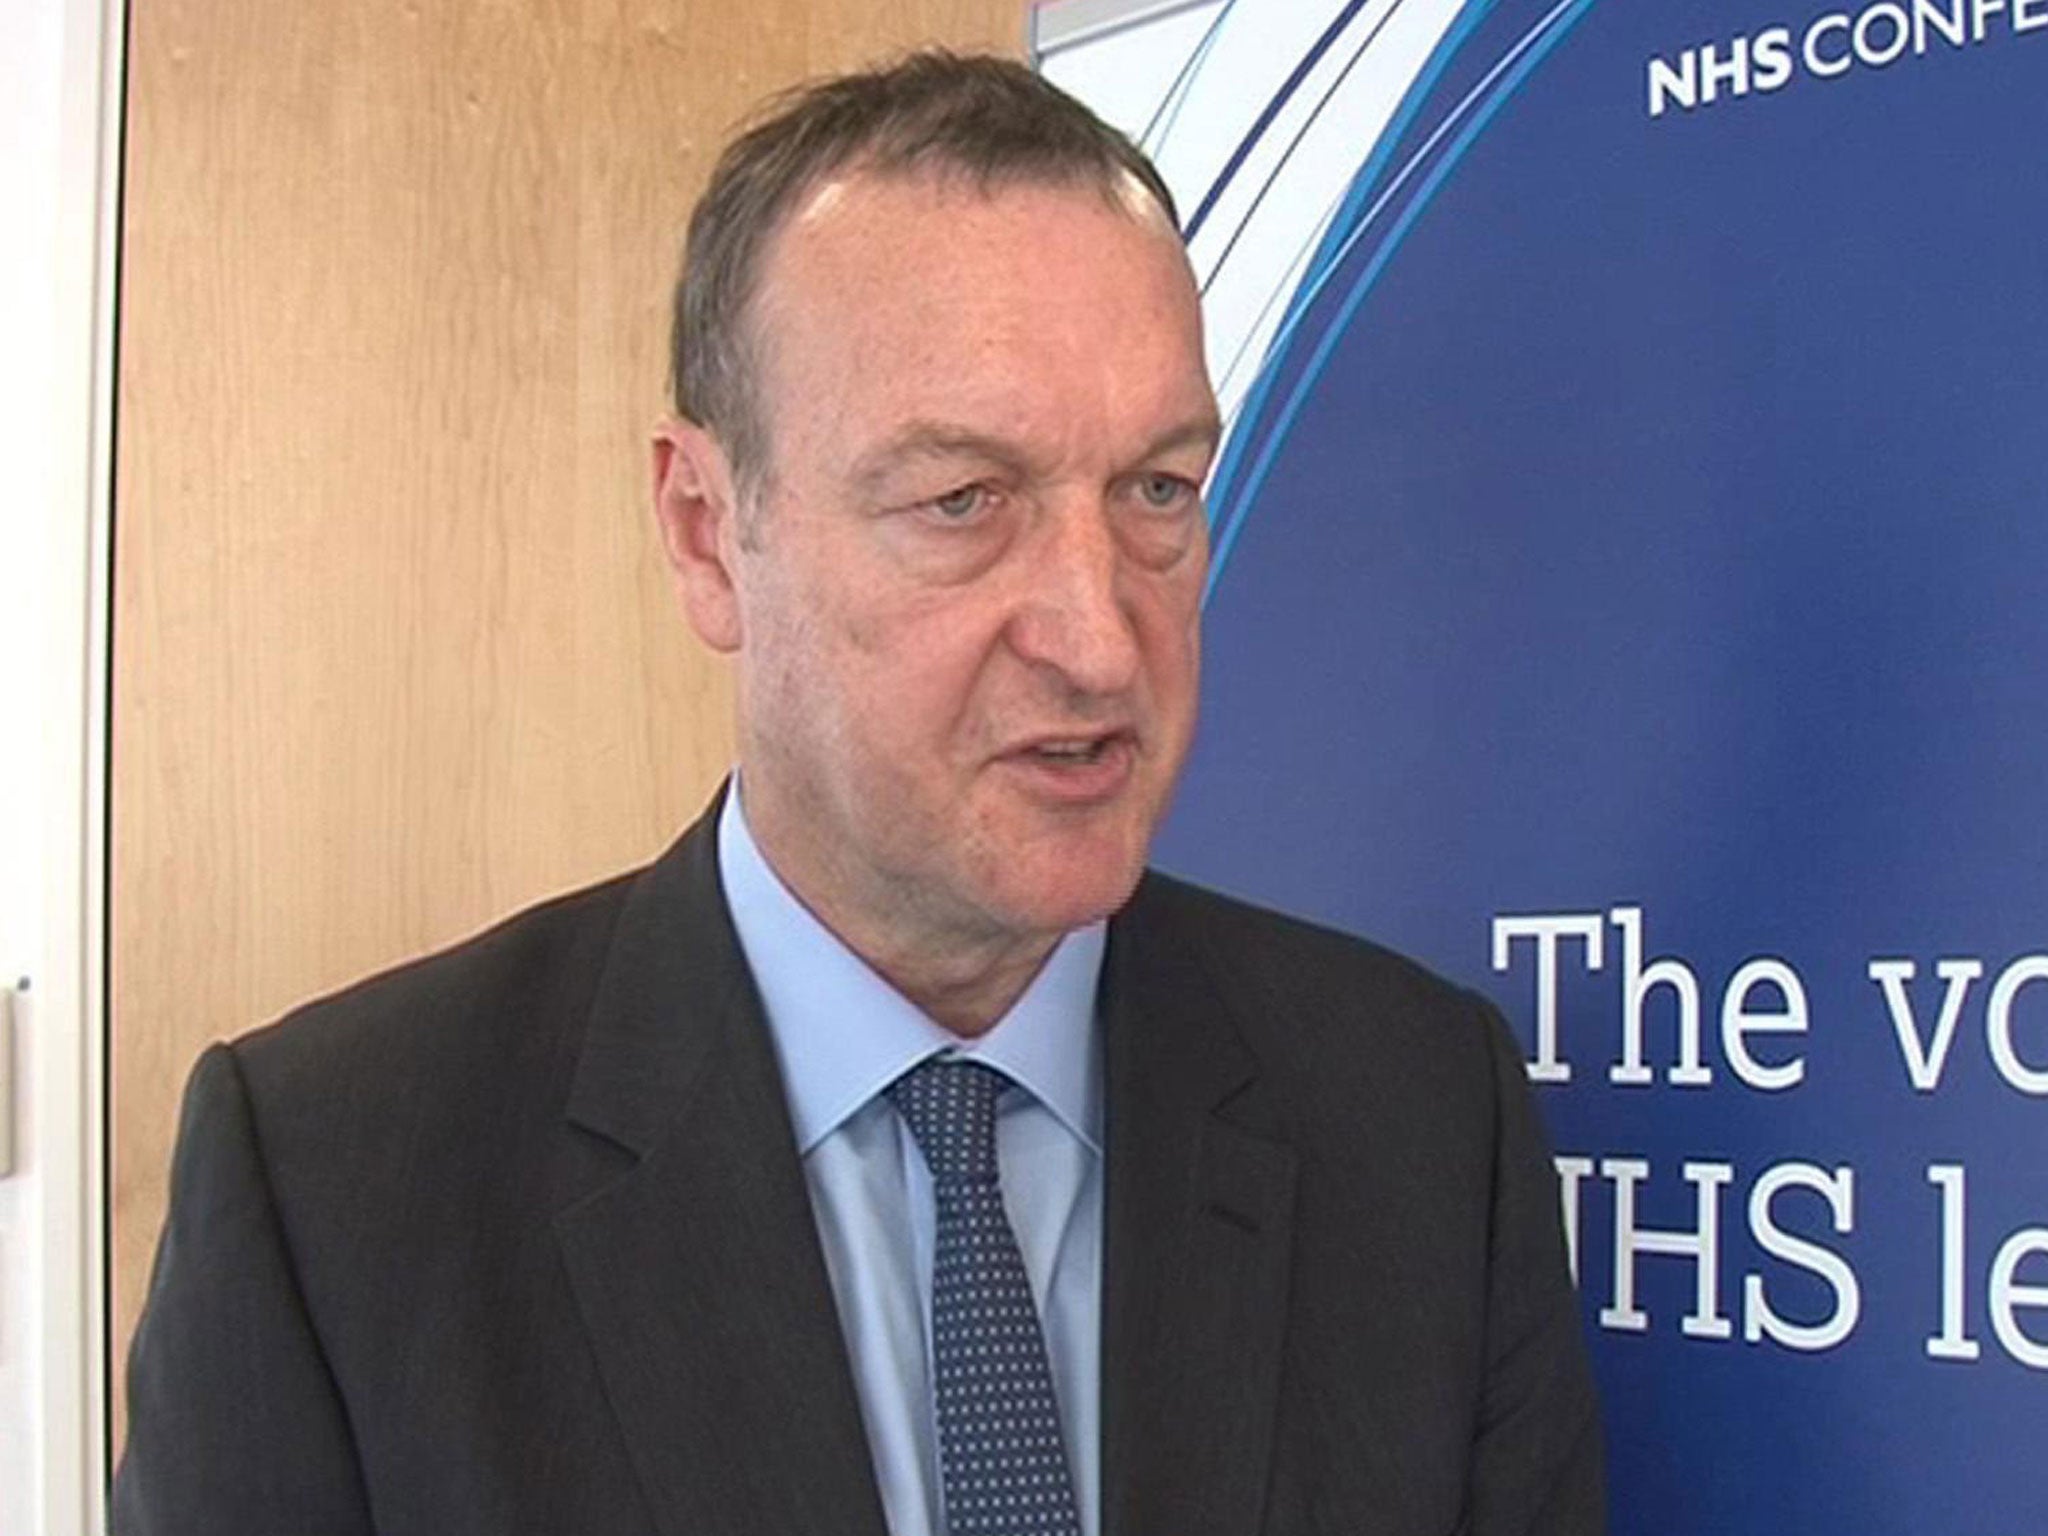 Mike Farrar: The former chief of Morecambe Bay's strategic health authority heads the NHS Confederation